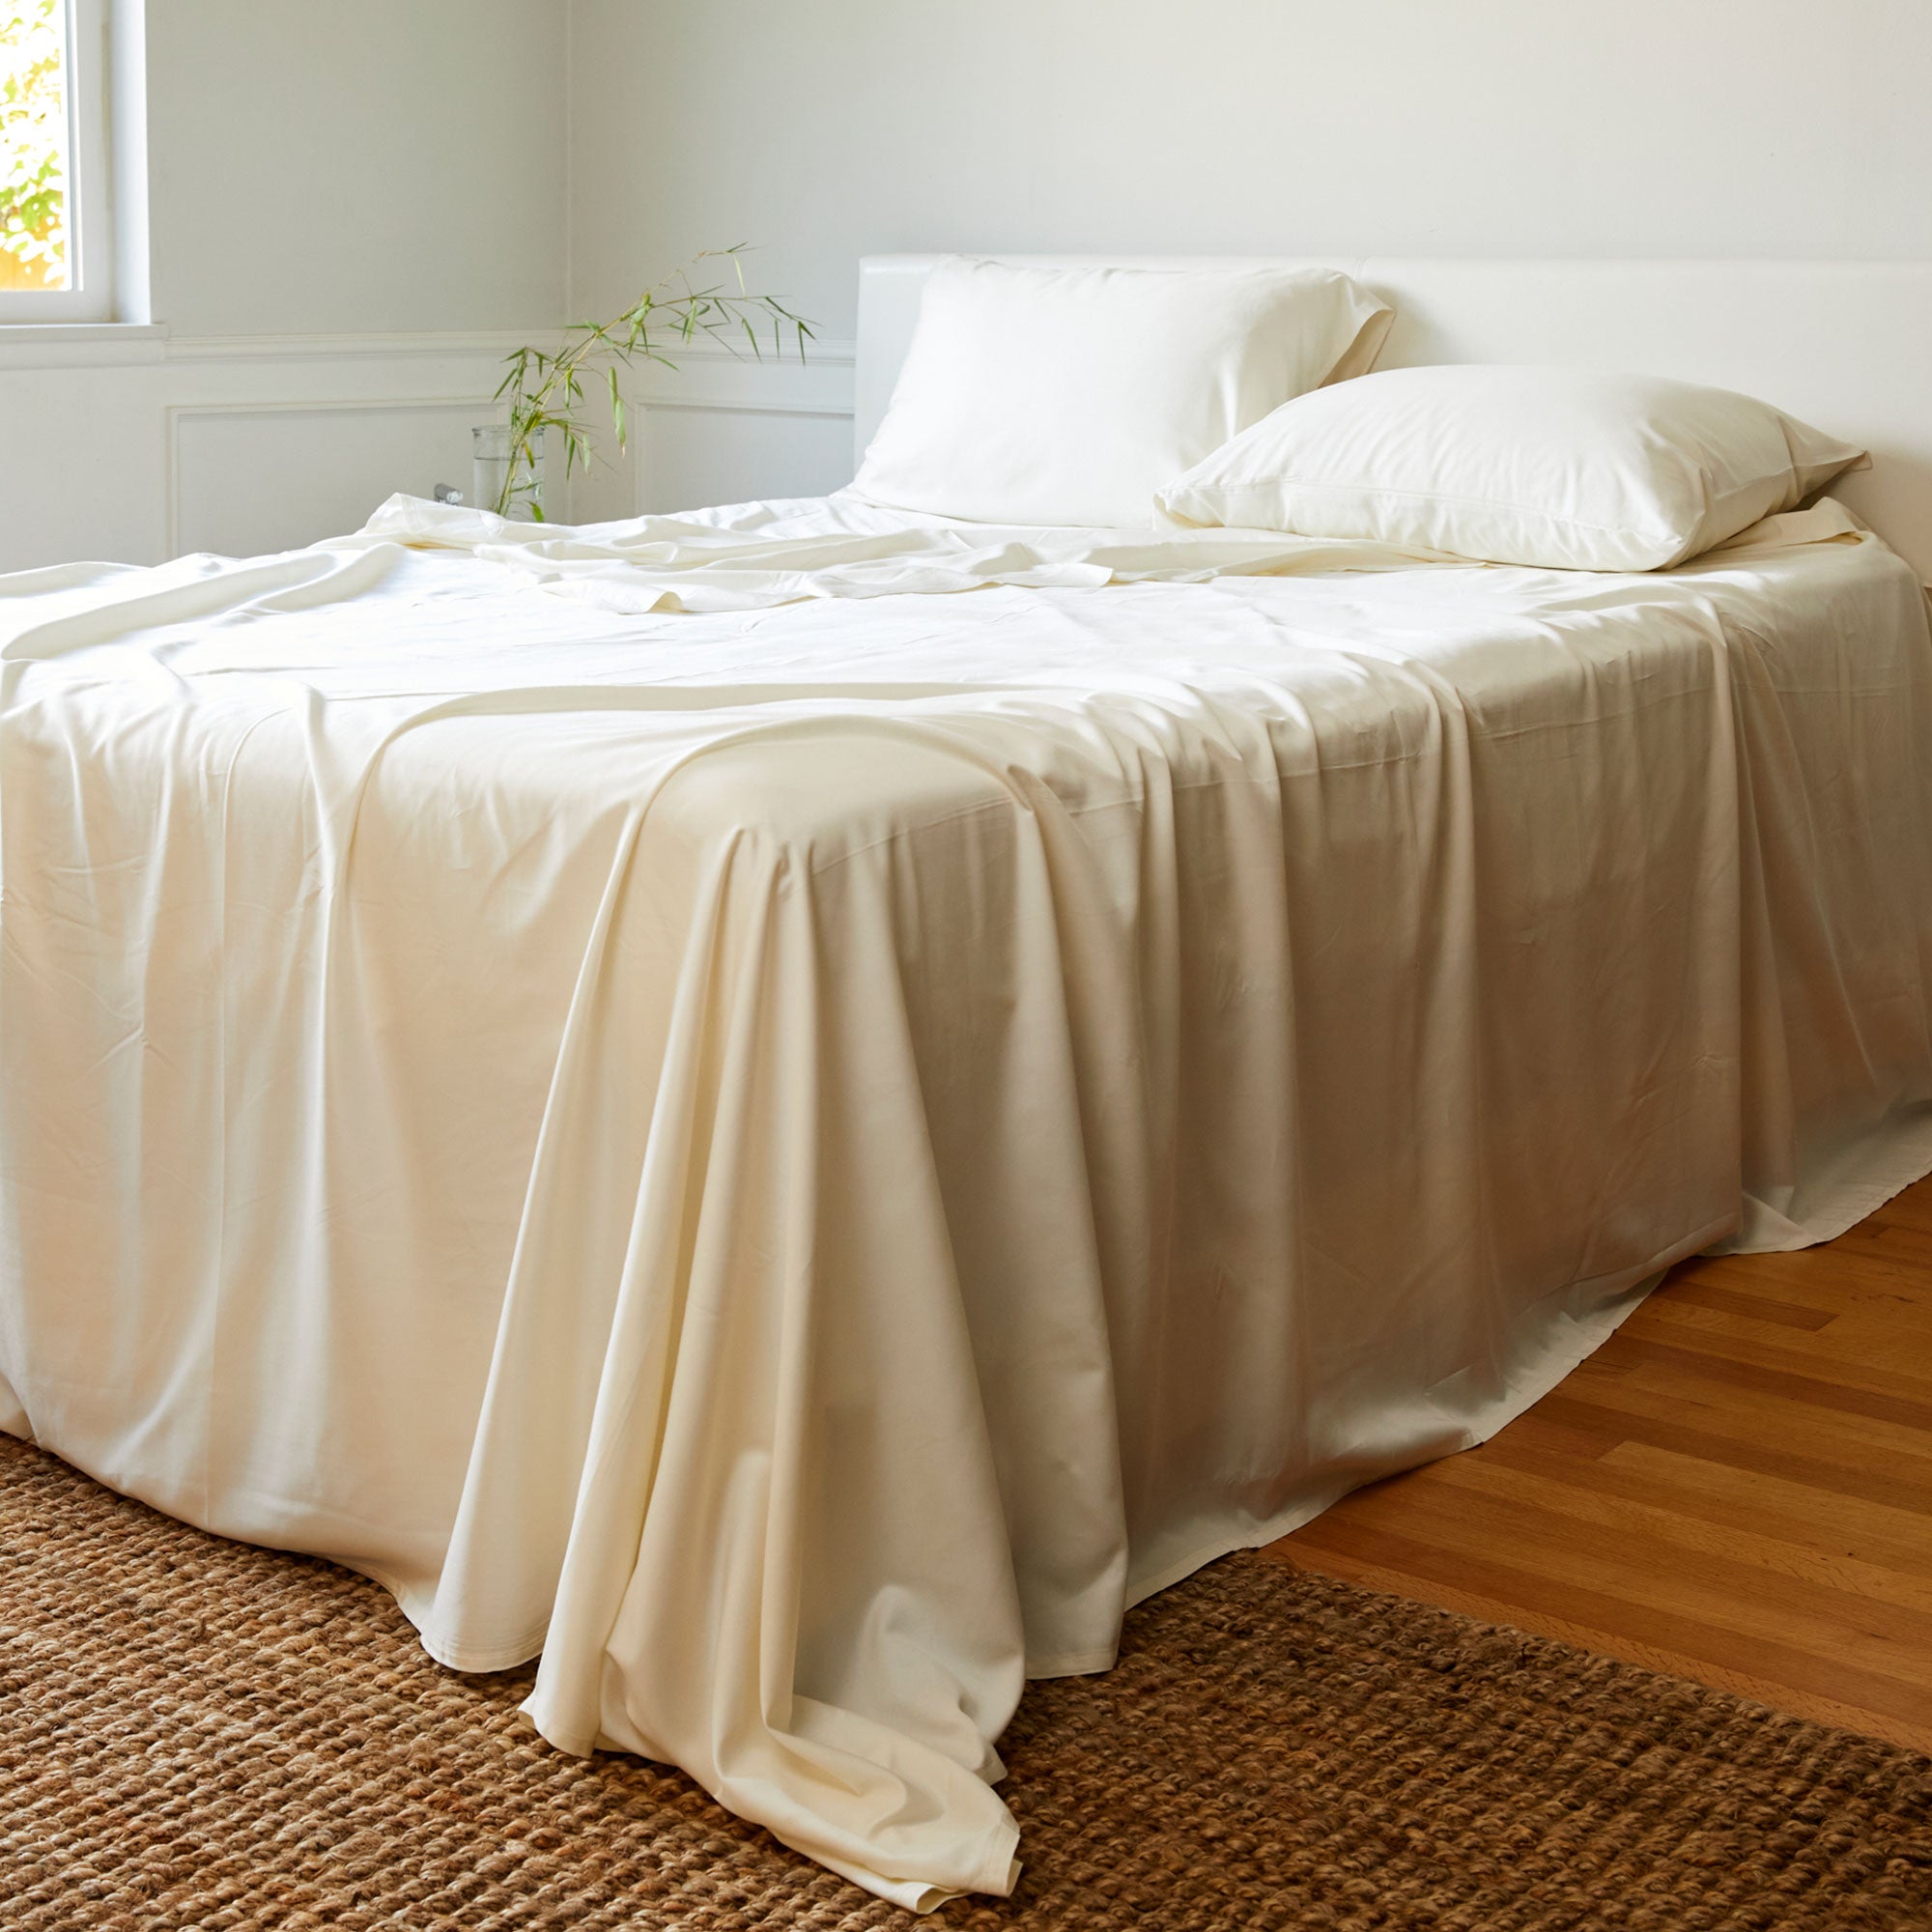 ivory bamboo bed sheets made on a bed with pillows and a woven rug on floor